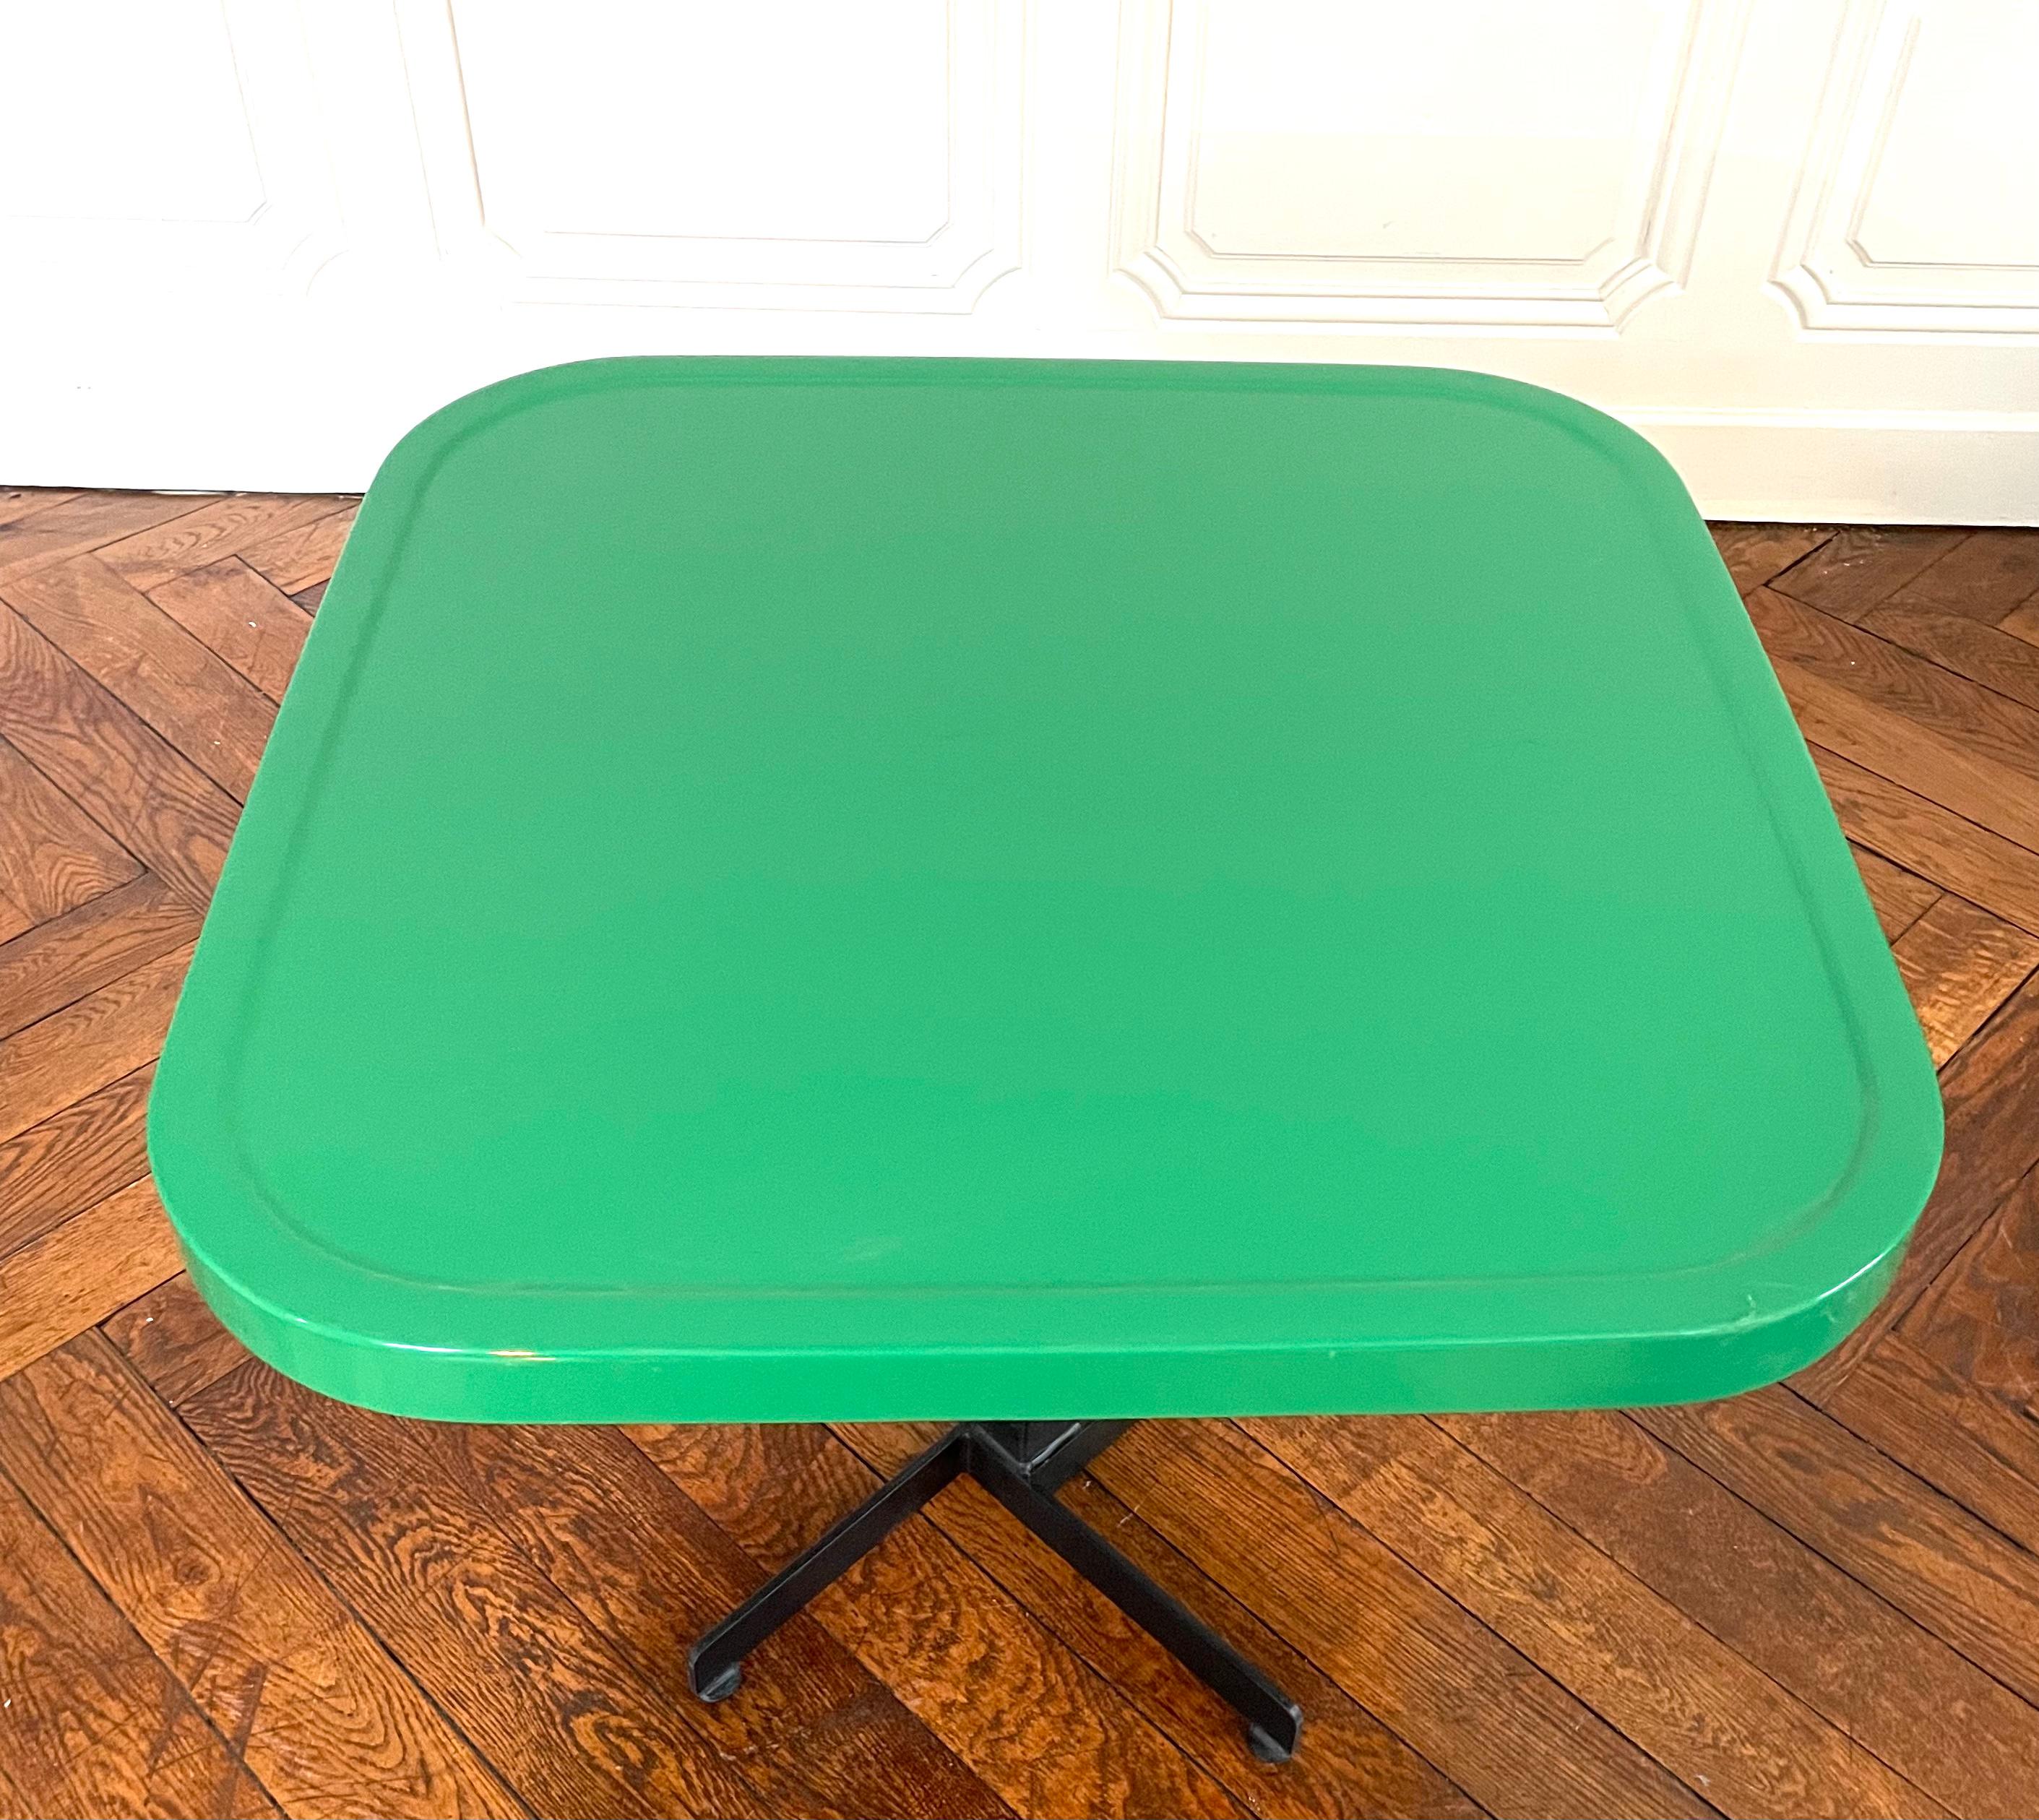 Late 20th Century Charlotte Perriand Square Table in Green Polyester from 1984 For Sale